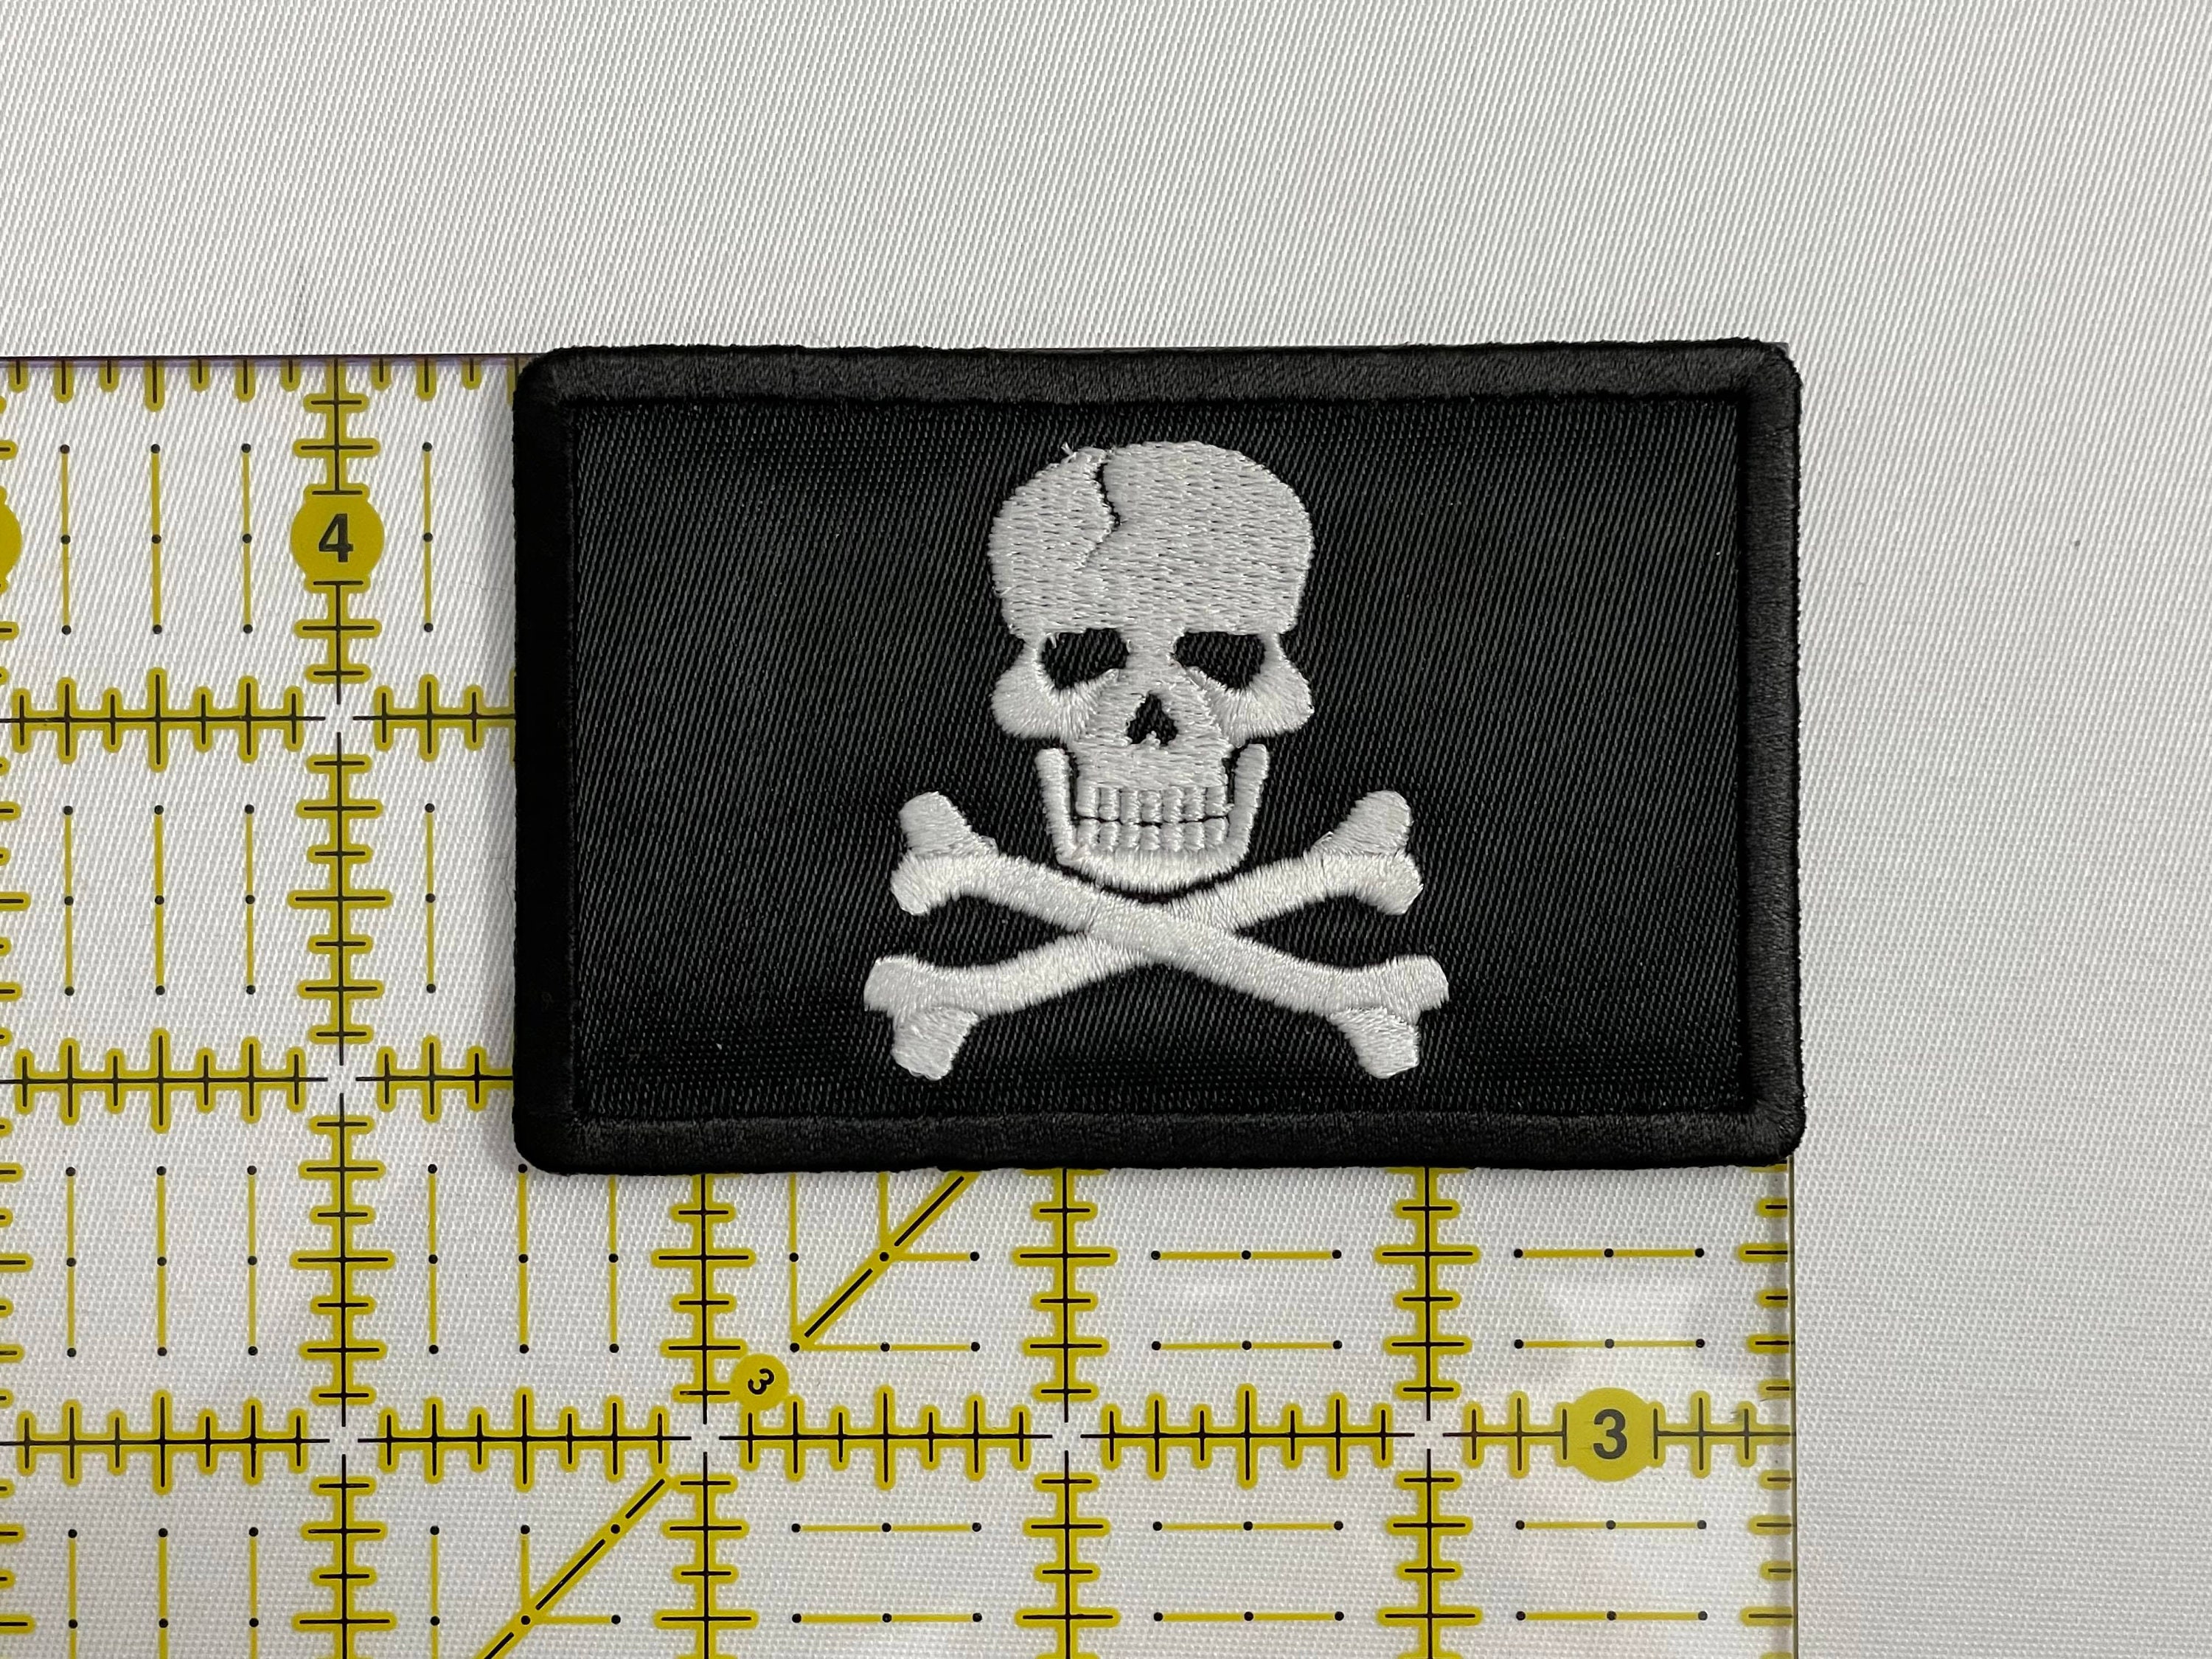 Jolly Roger Pirate Flag Patch Sew-on Iron-on Hook | Etsy